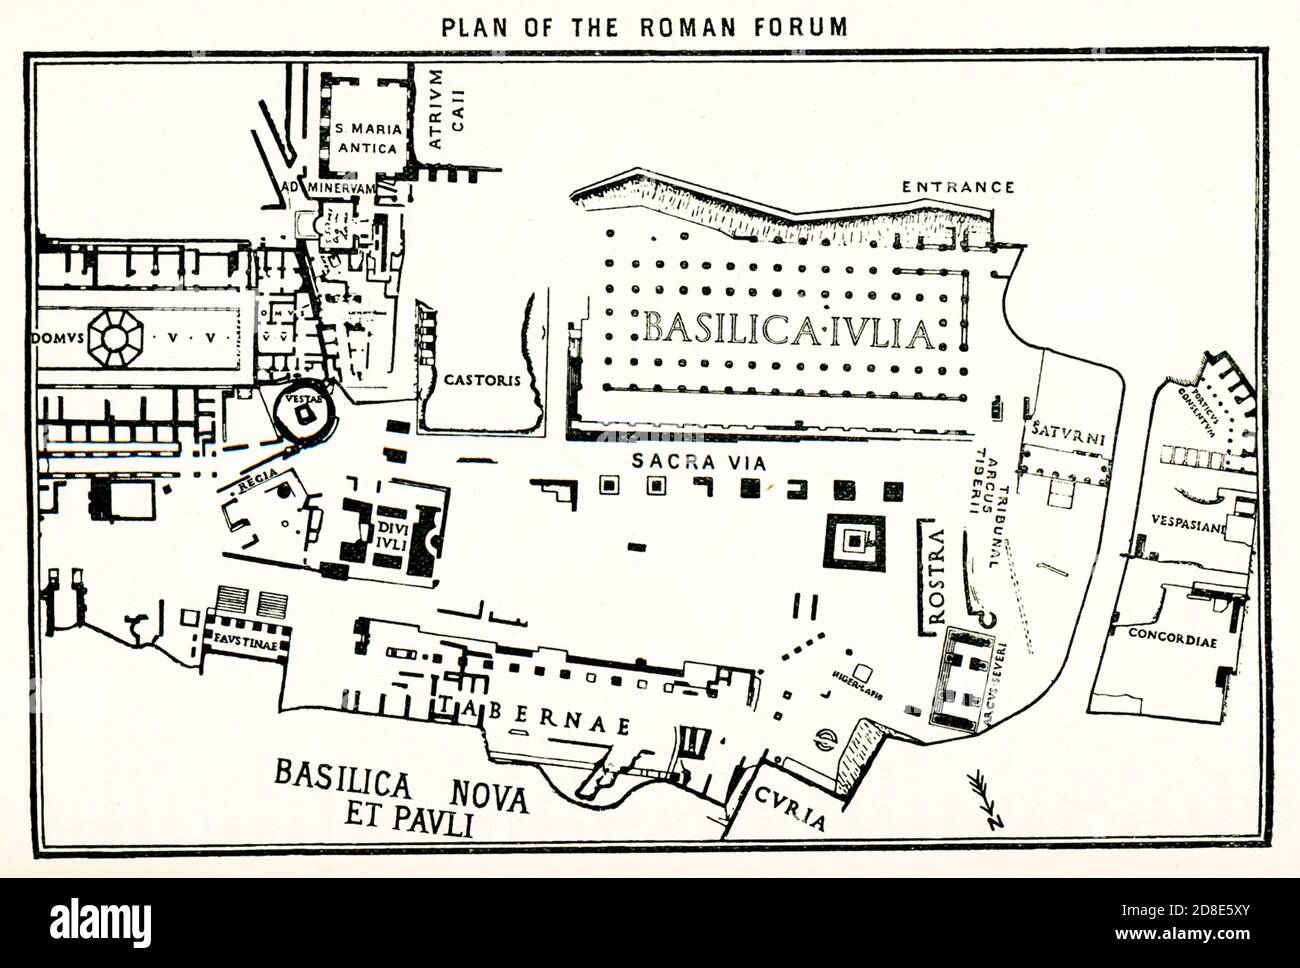 This 1876 illustration offers a plan of the ancient Roman Forum. In ancient Rome, the forum was the market and meeting place and consisted of an open square surrounded by public buildings. The best known forum is the one in Rome, pictured here.  The structure in the middle is the Julian Basilica. Running in front is the Sacra Via (Sacred Way) Stock Photo